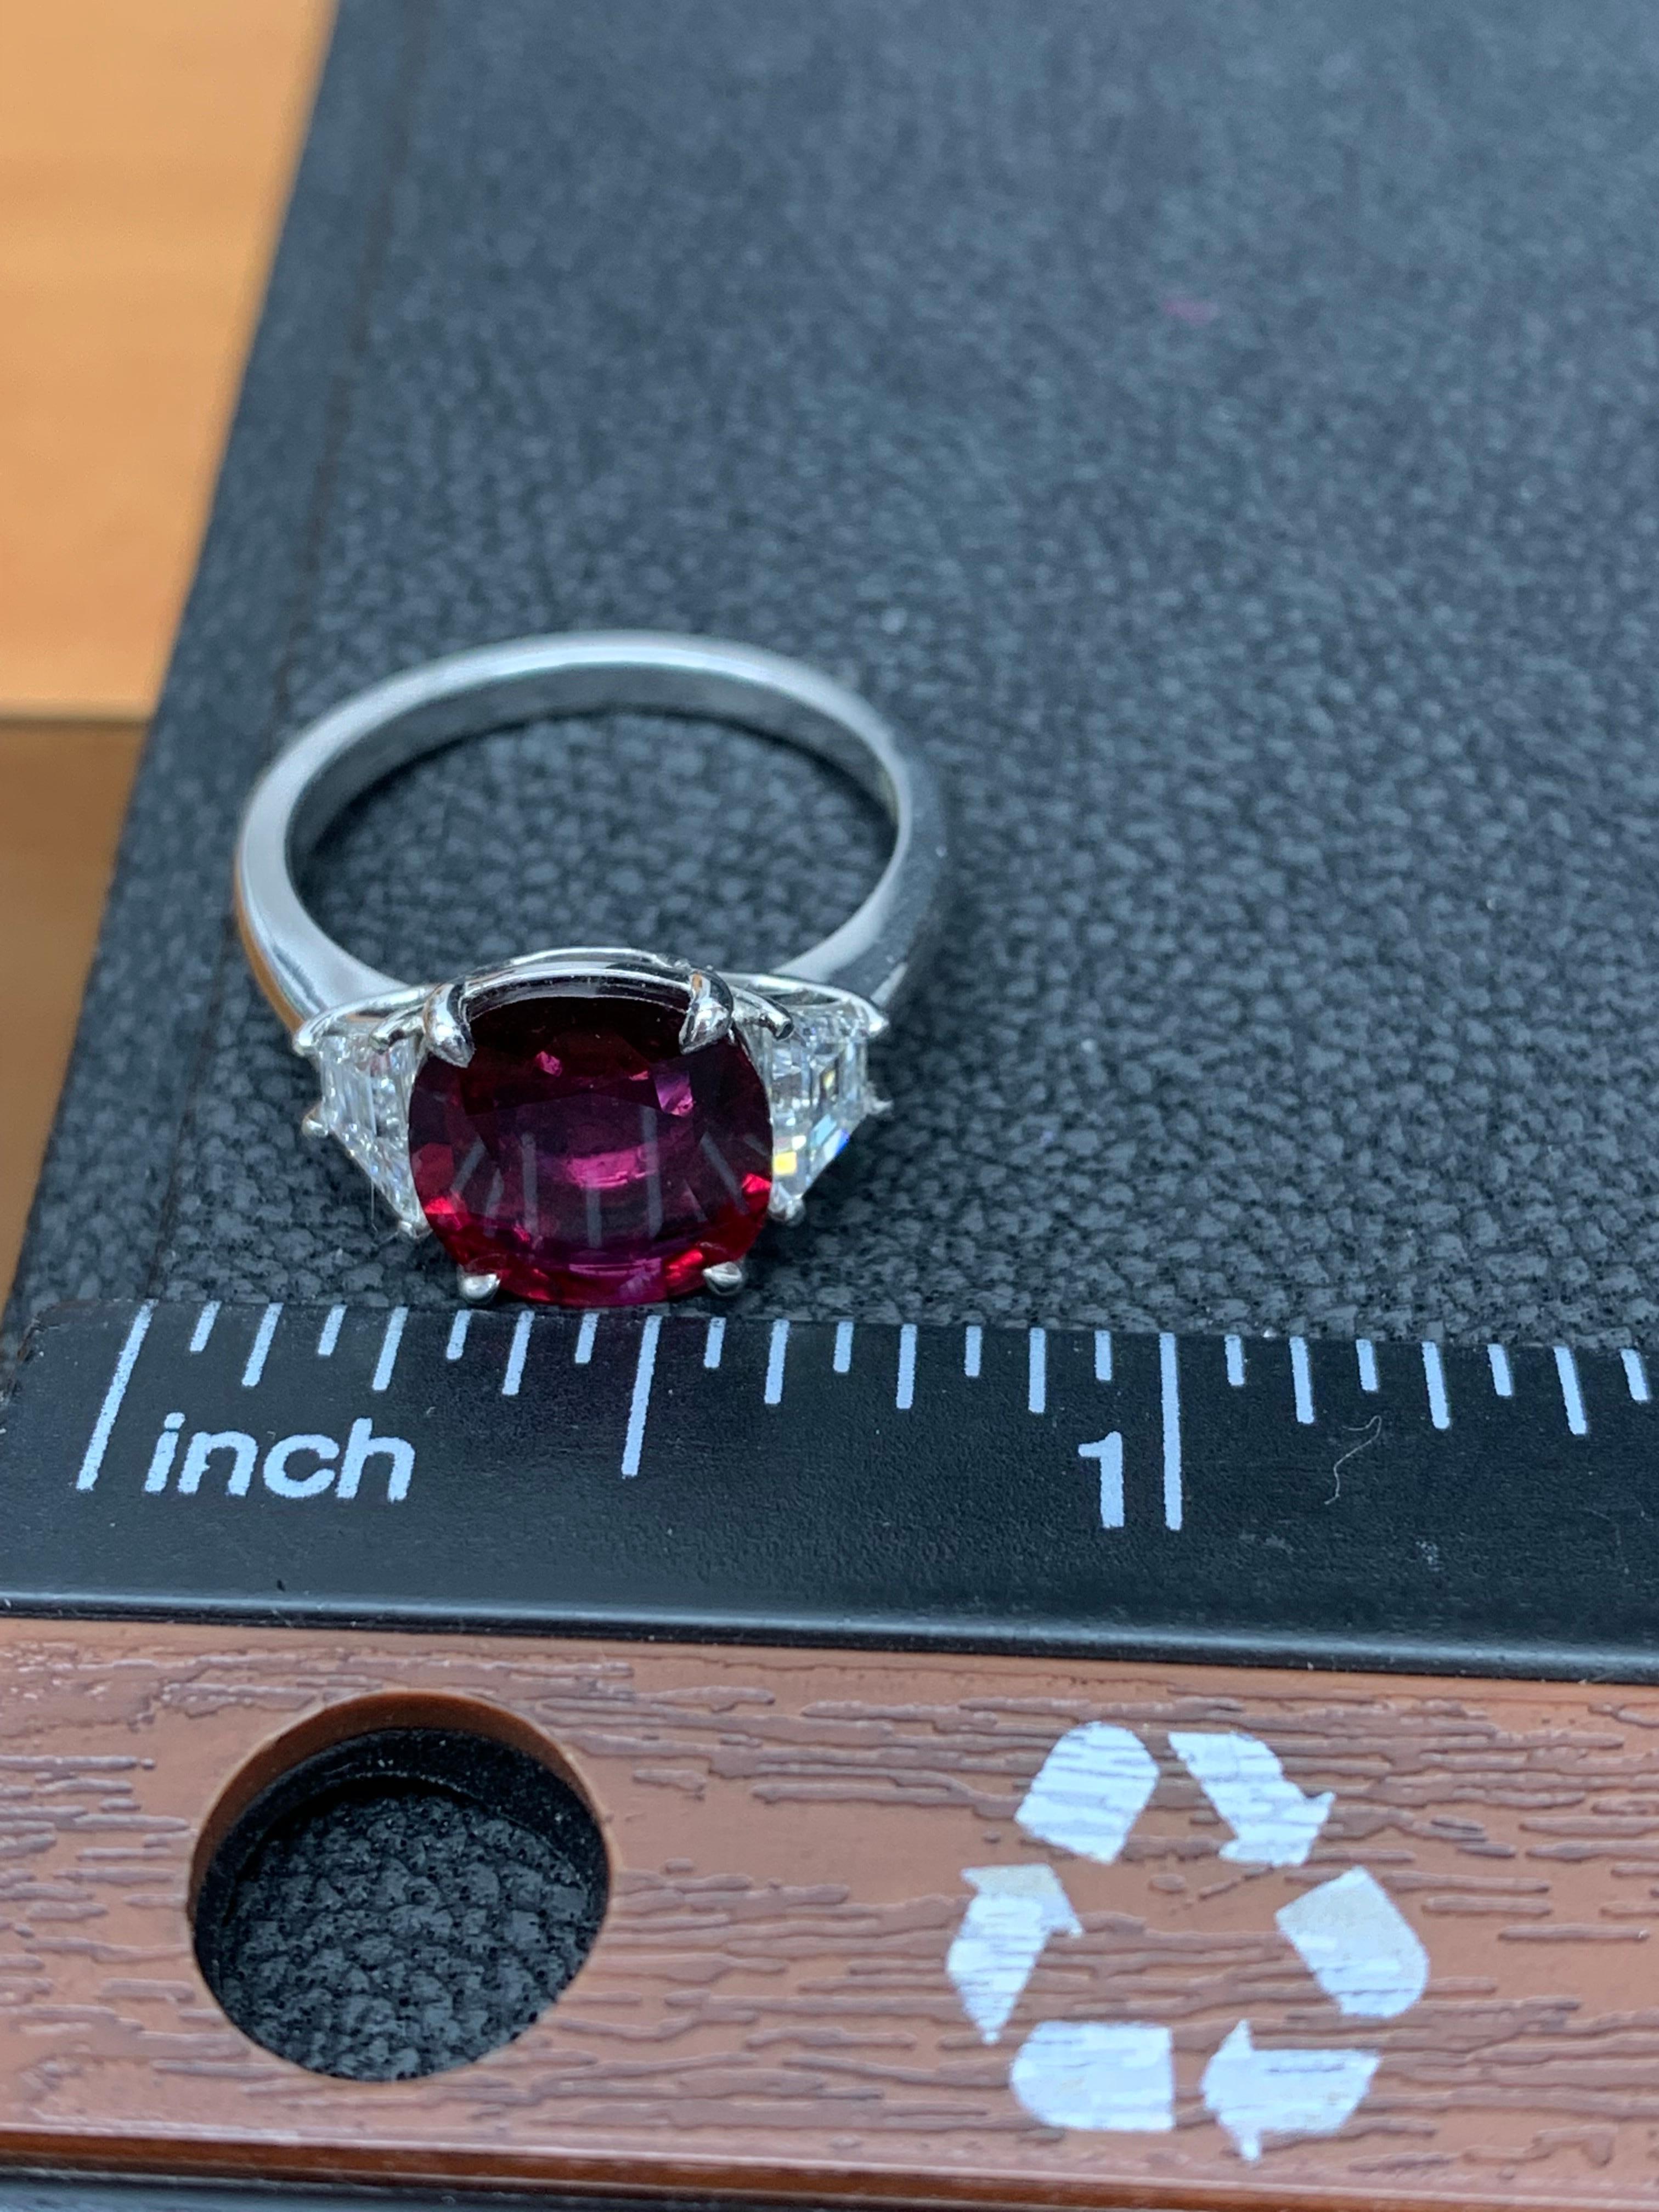 Features a gorgeous ruby and diamond one-of-kind ring. Flanking the ruby are 2 step cut trapezoids diamonds weighing 0.62 carats total. Set in a platinum composition. Size 6.5 (sizable upon request).